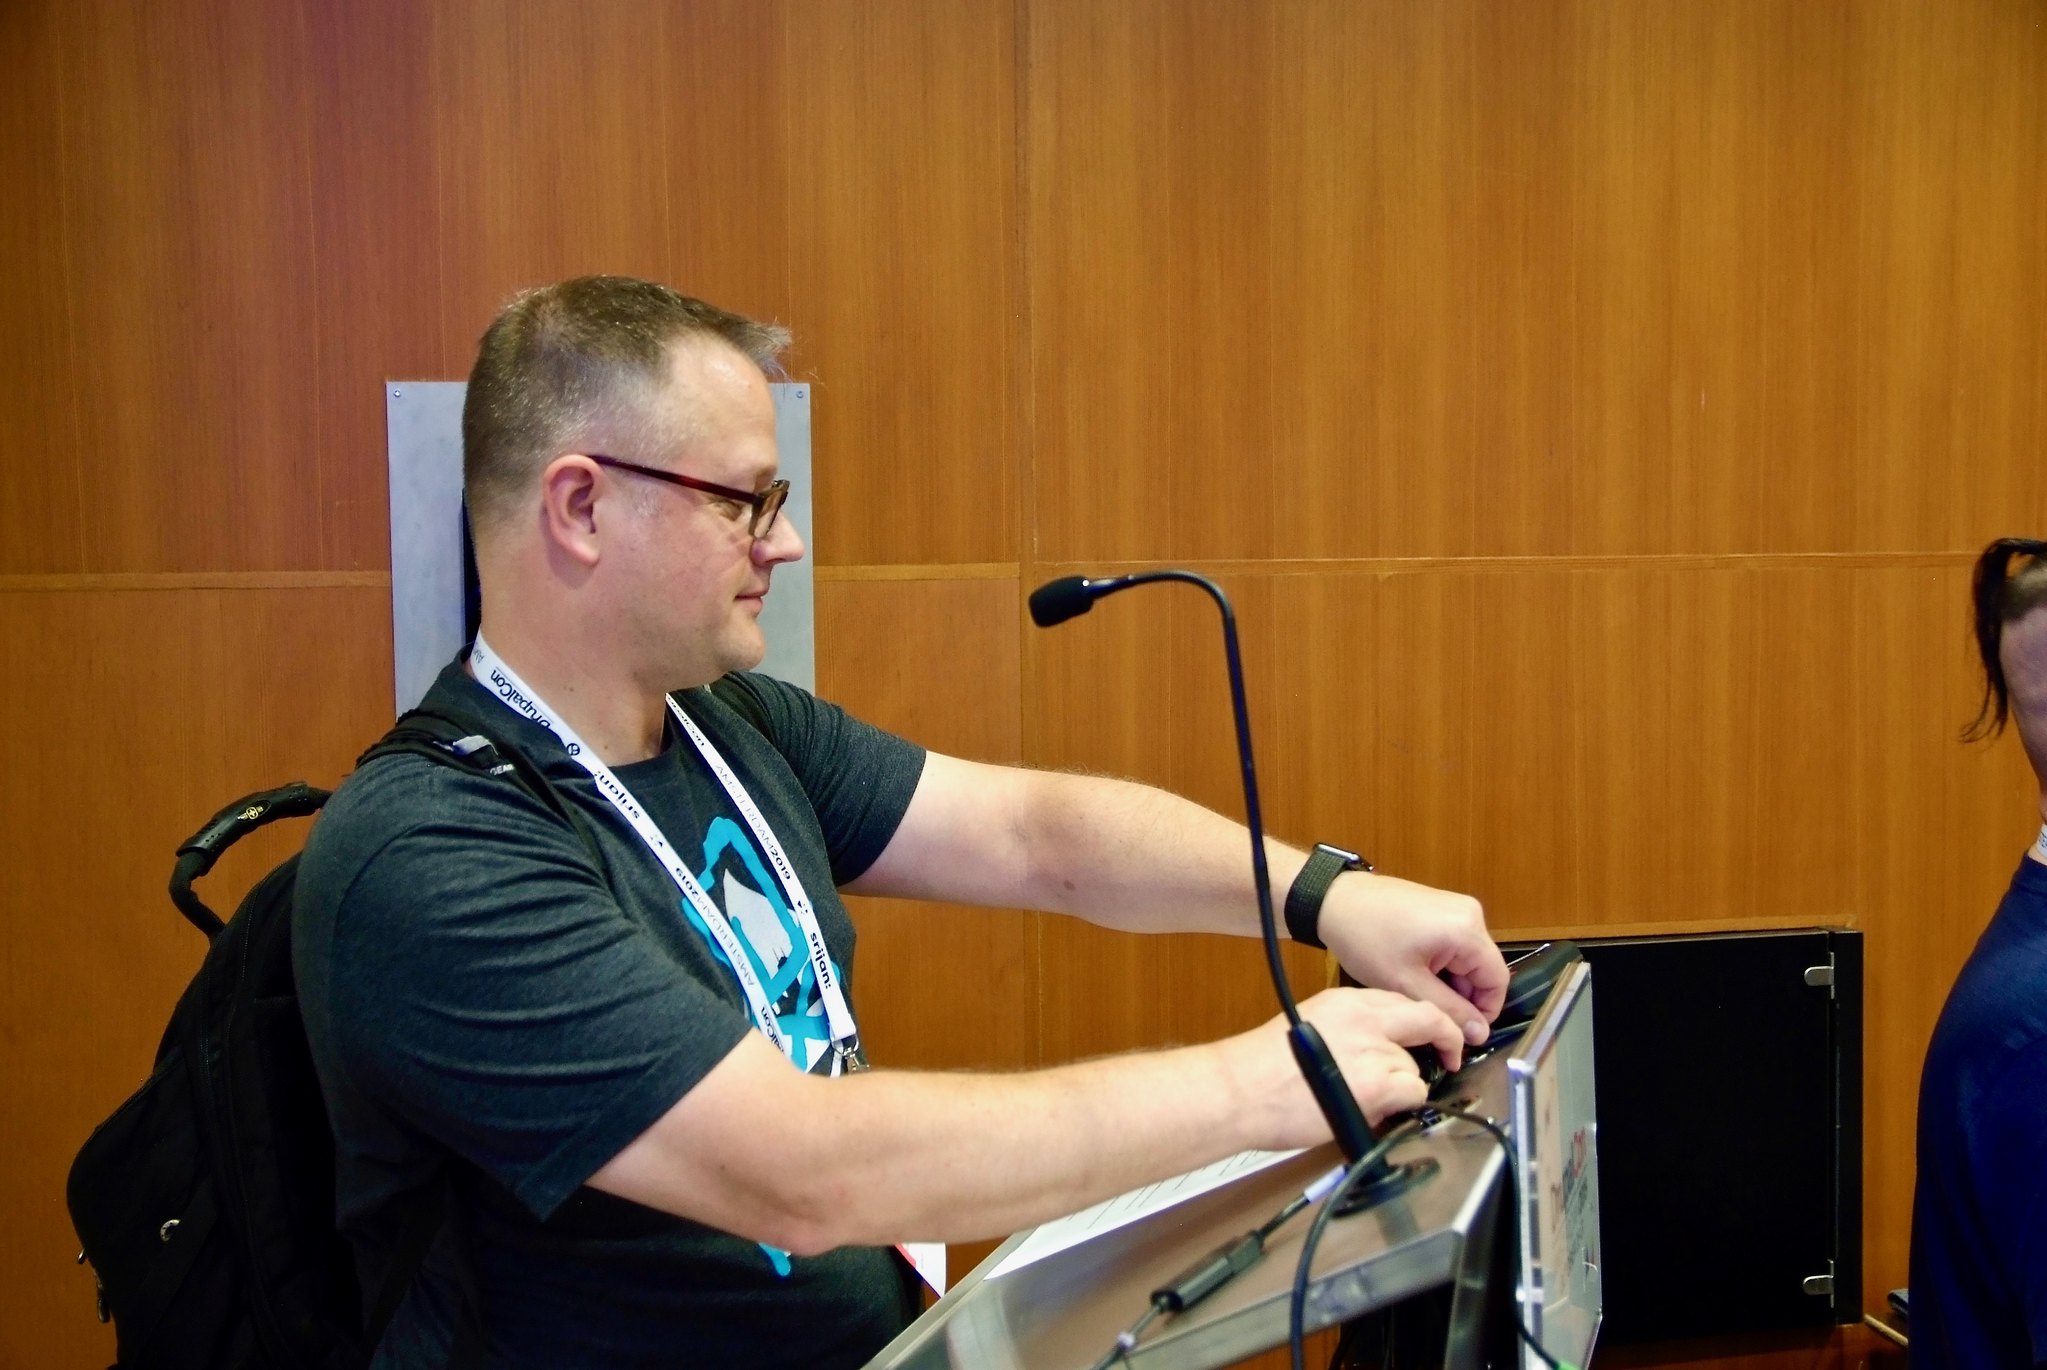 breaking down the equipment at drupalcon amsterdam